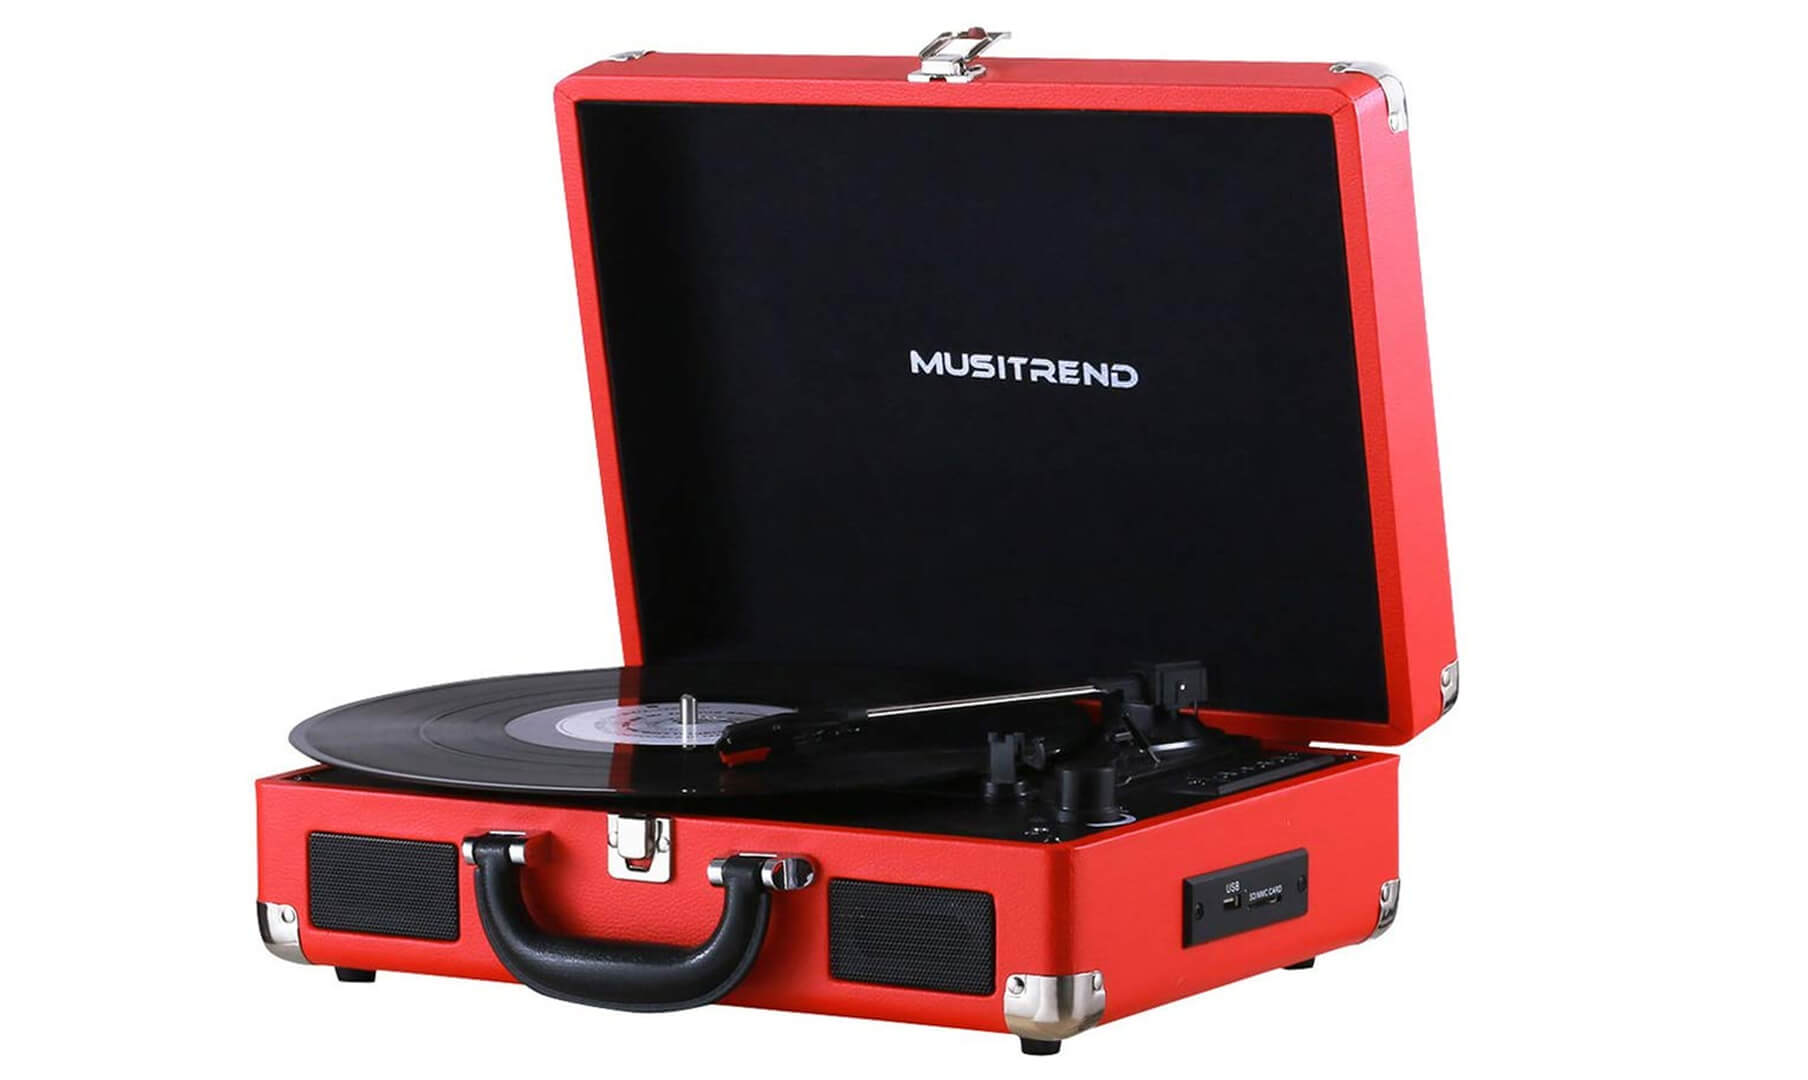 MUSITREND Record player